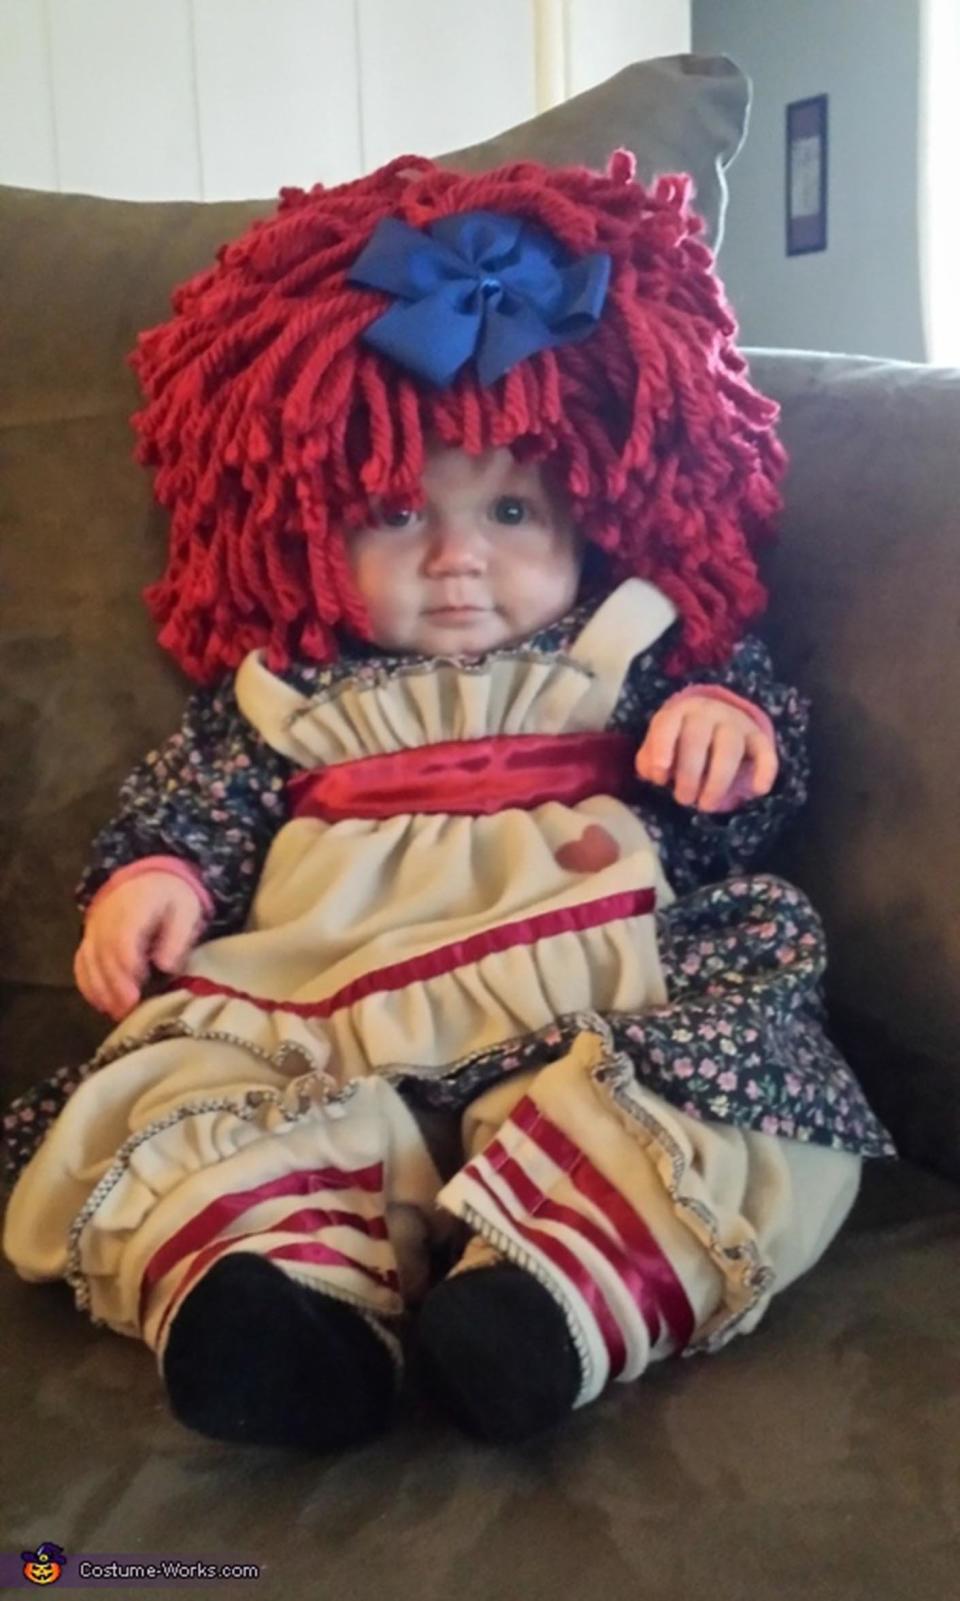 Via <a href="http://www.costume-works.com/costumes_for_babies/raggedy-ann12.html" target="_blank">Costume Works</a>